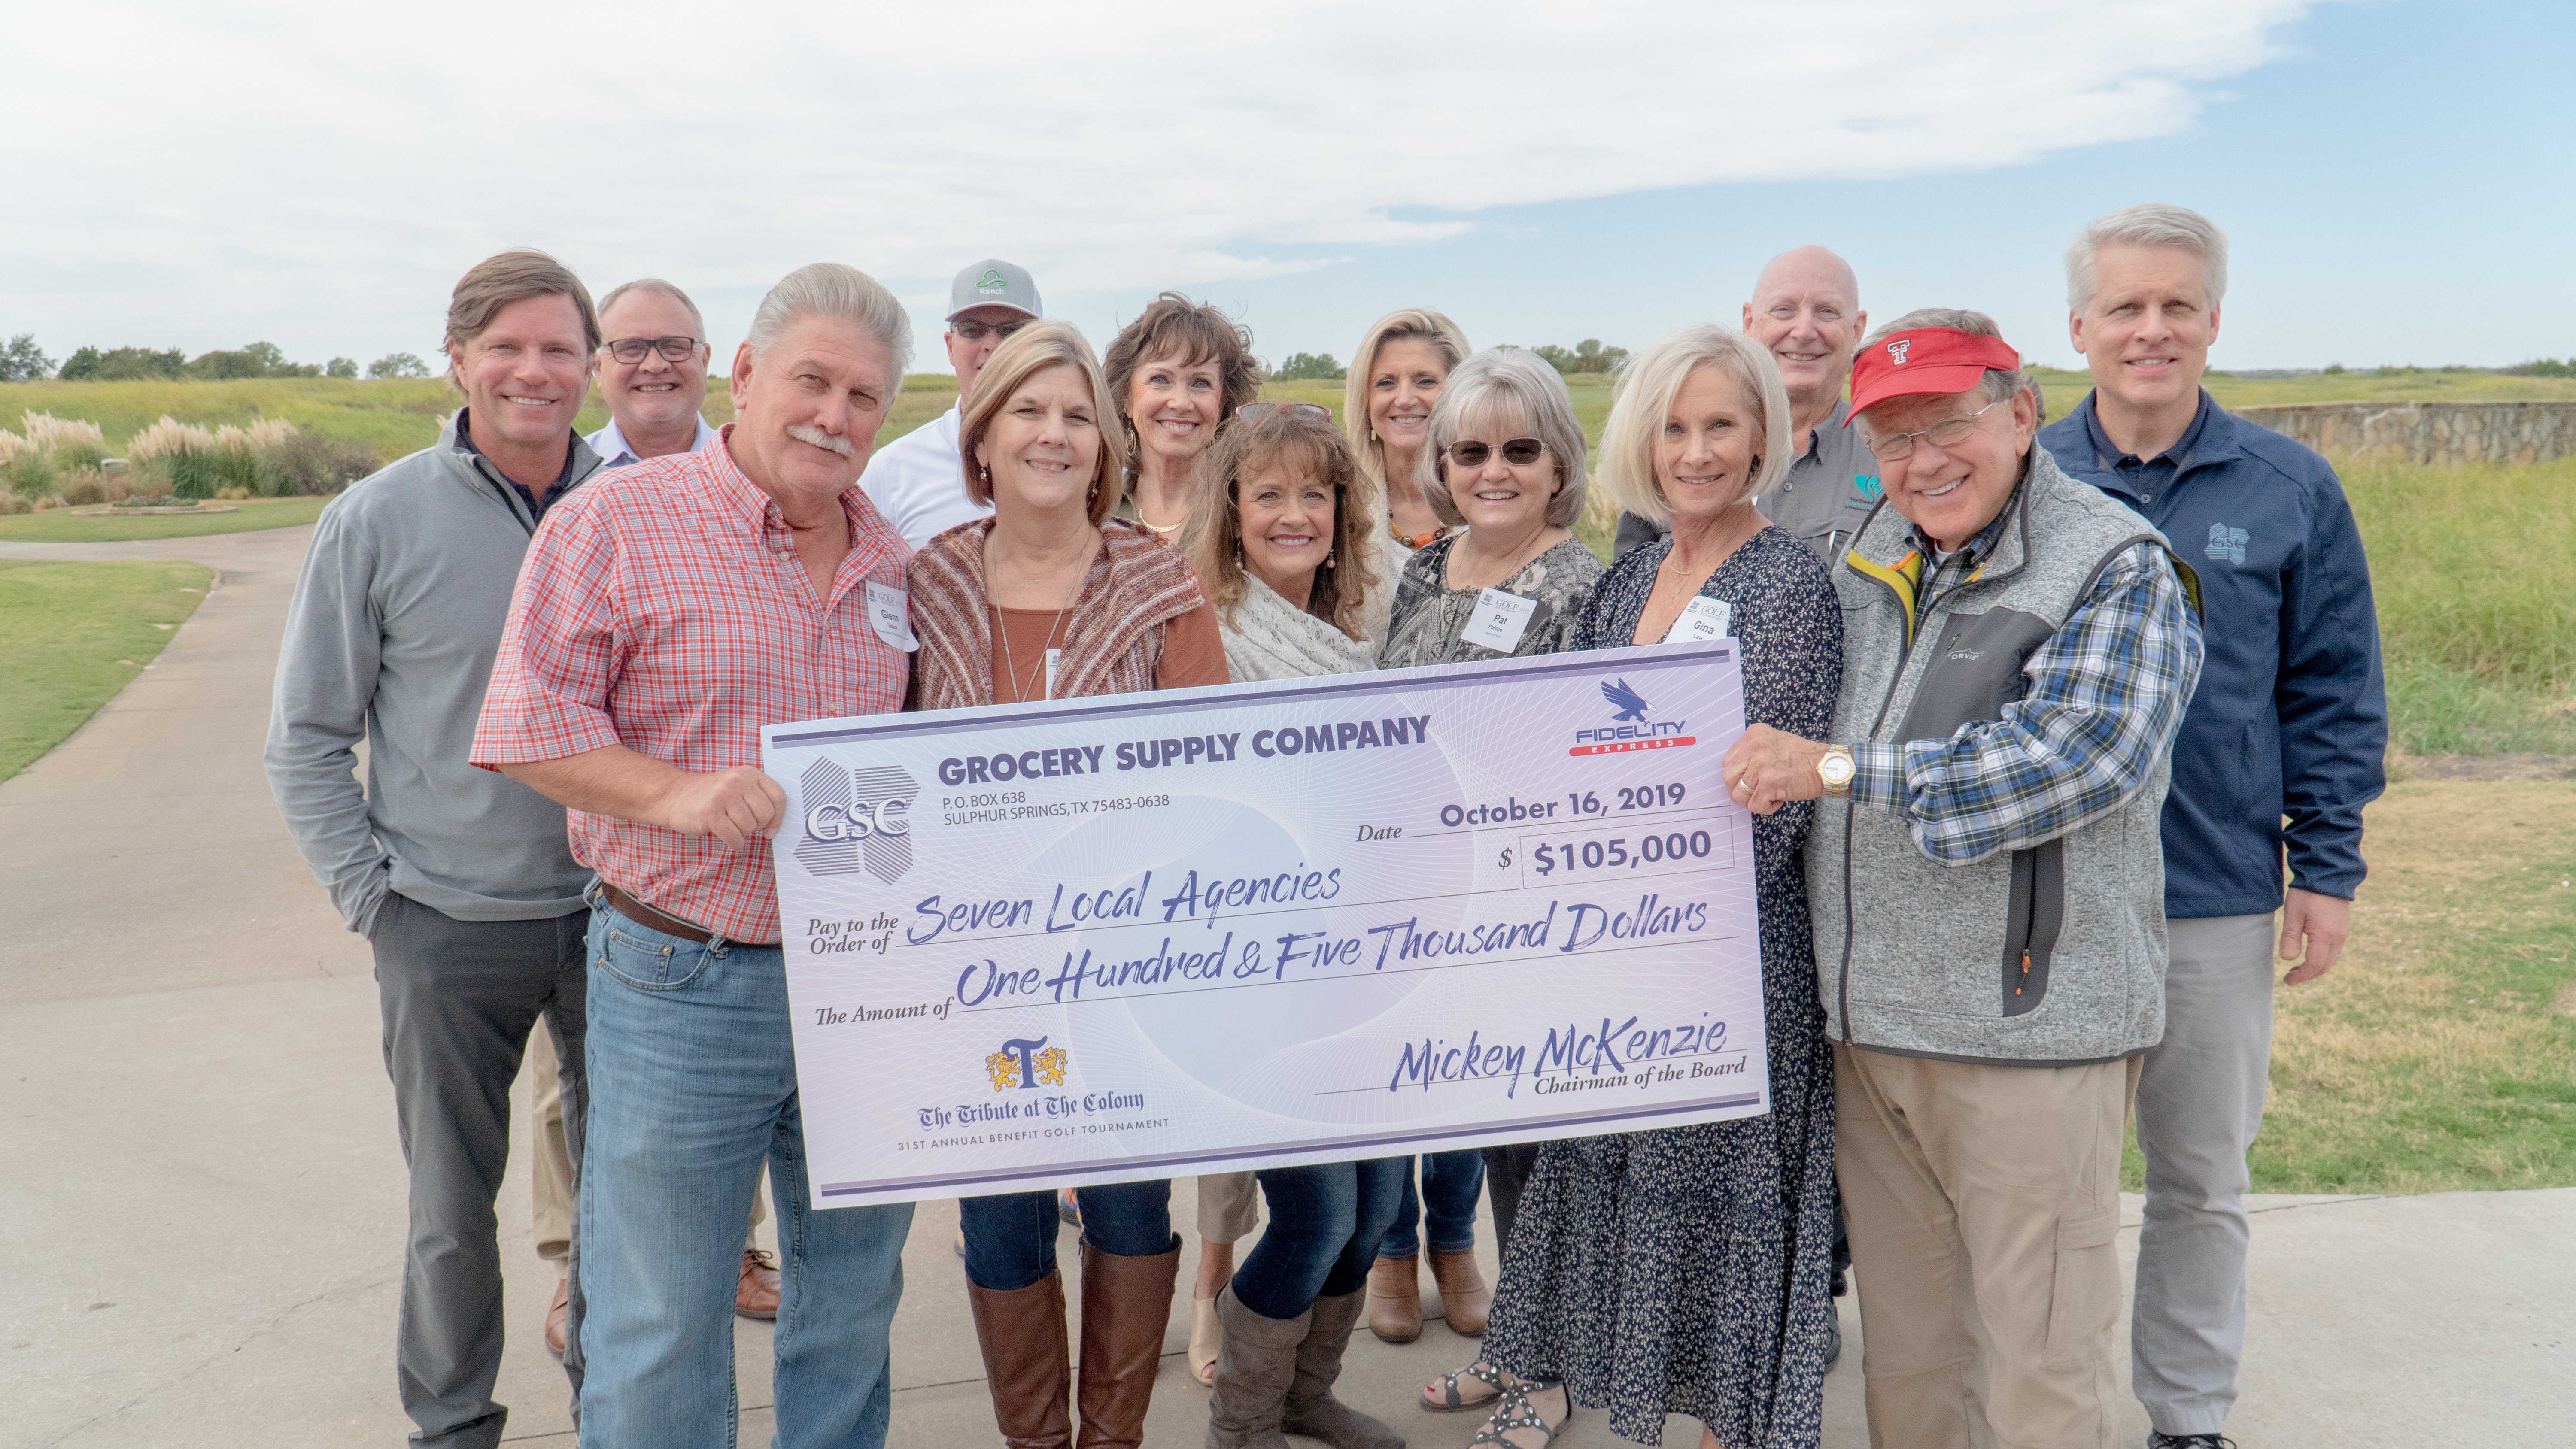 Grocery Supply Company Raises $105,000 for Charities at 31st Annual Charity Golf Tournament